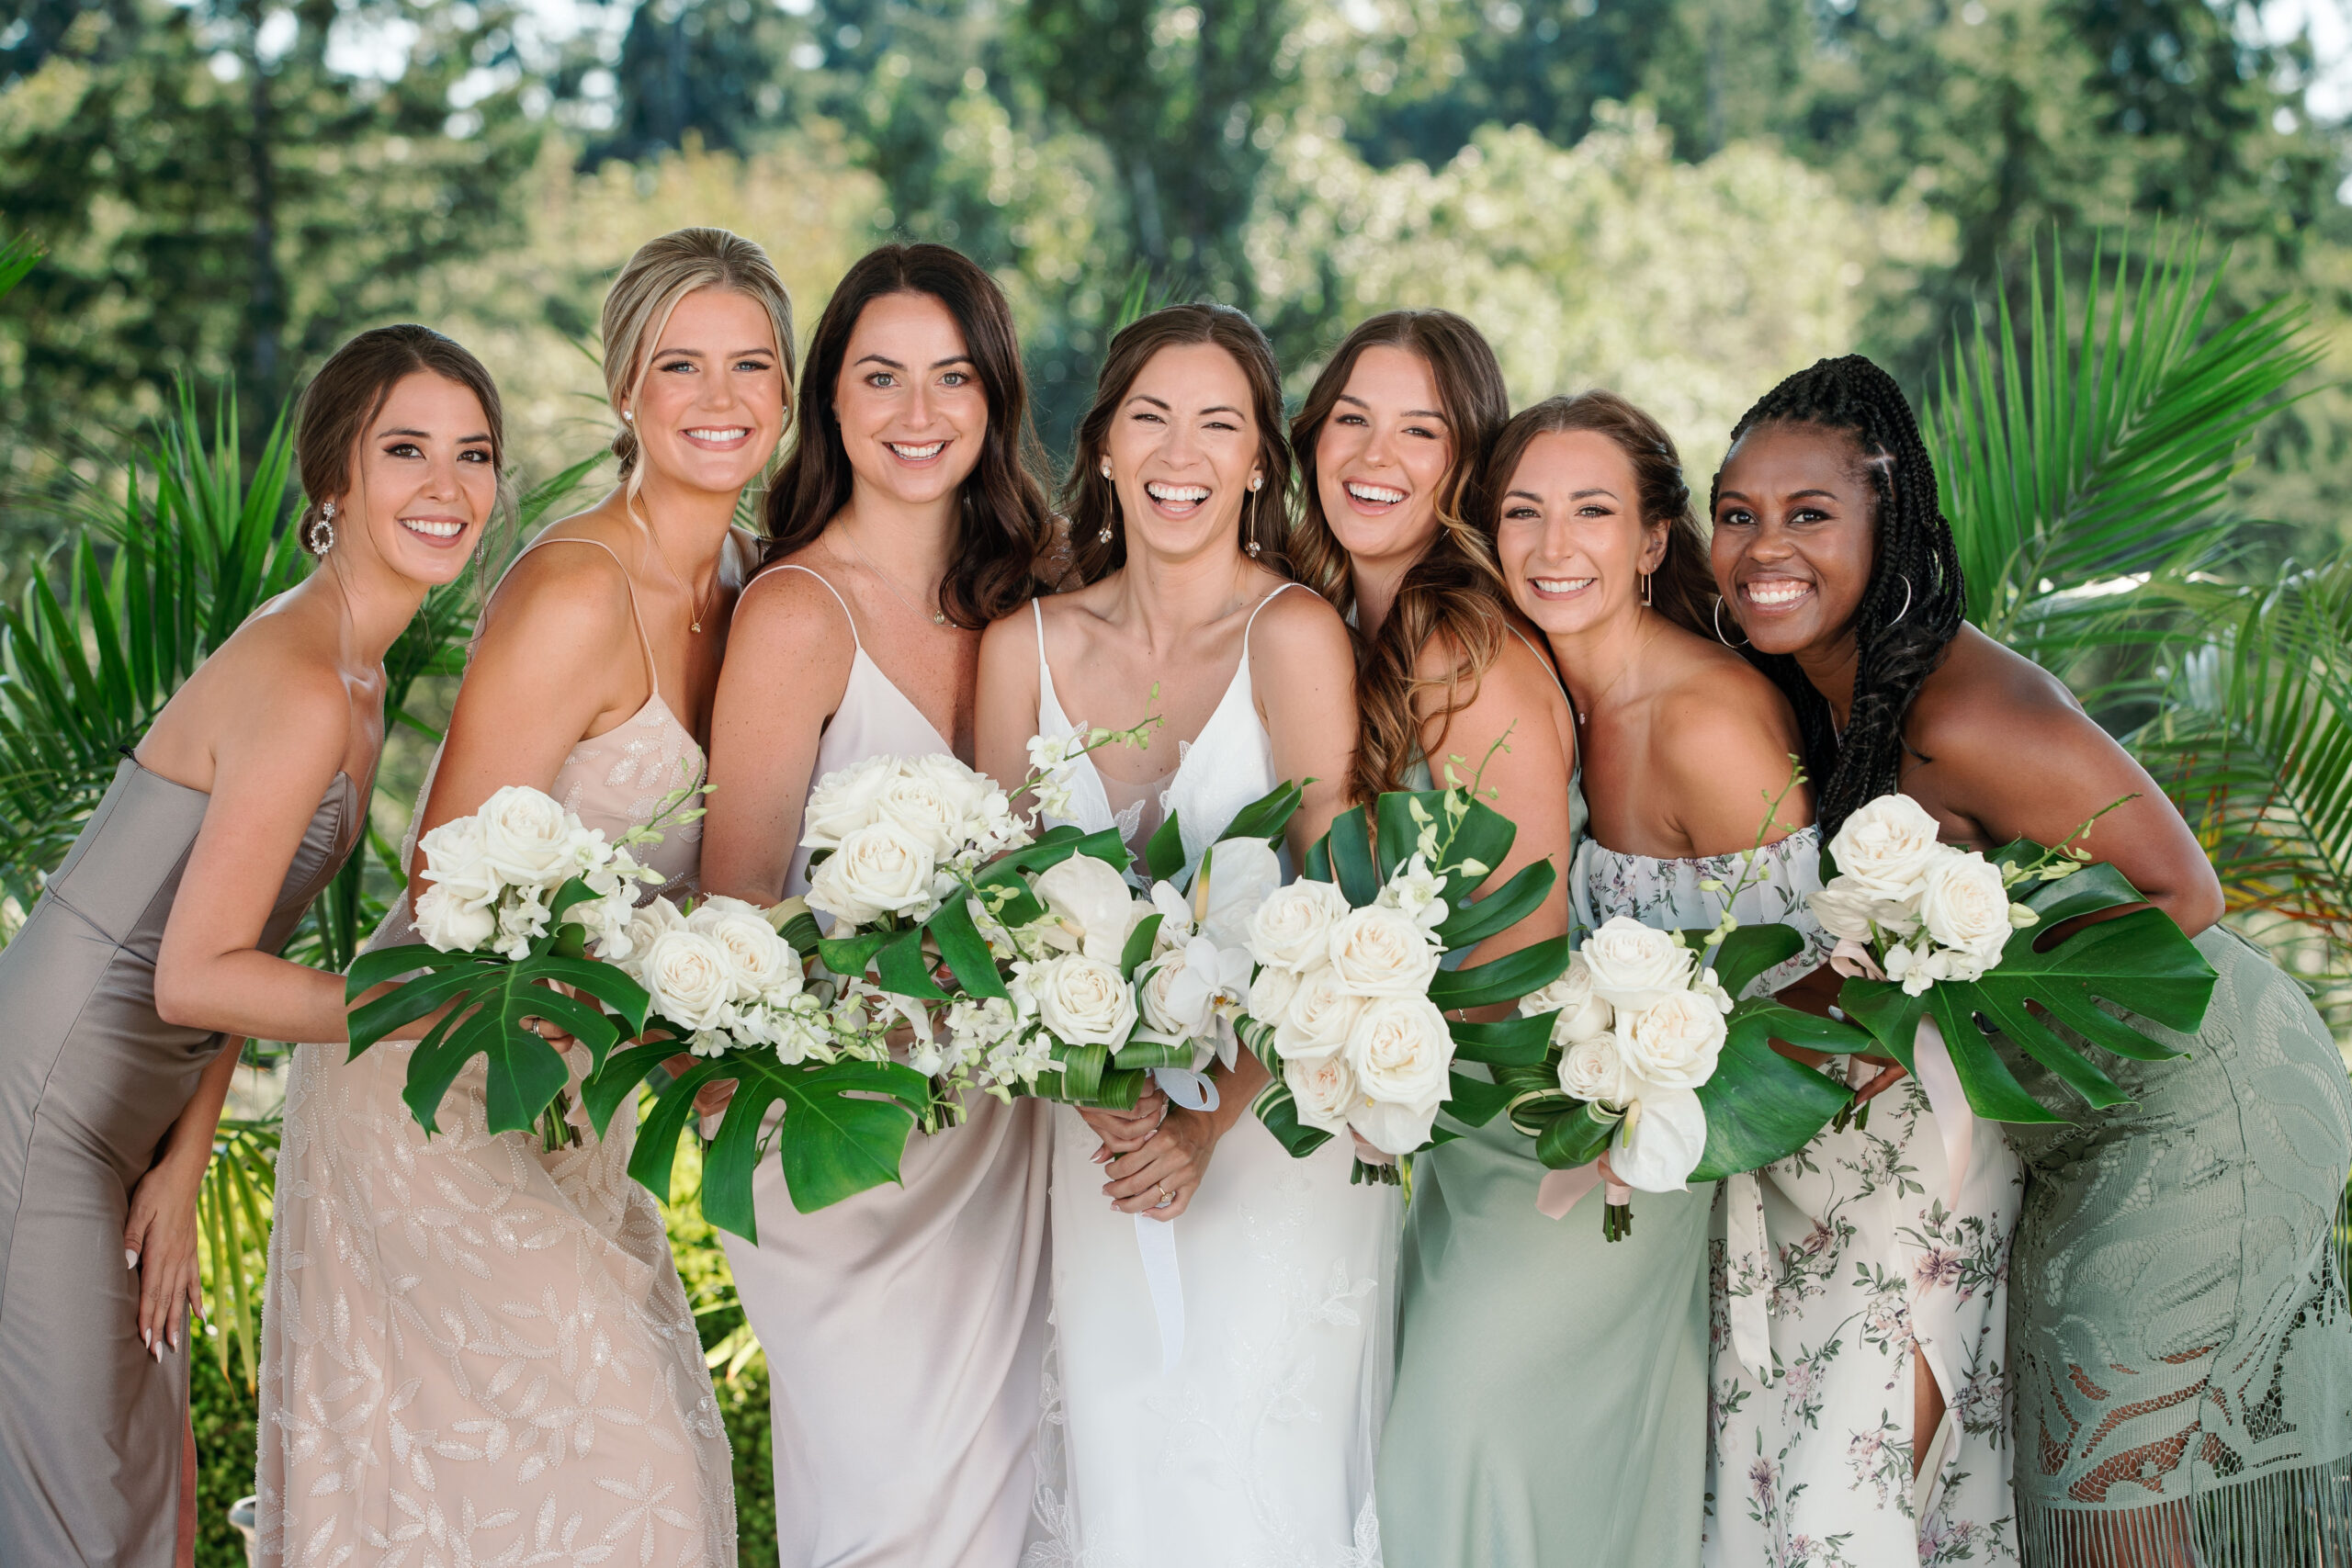 Willamette Valley Oreogn winery wedding photography of a group of bridesmaids Oswego Hills vineyard wedding